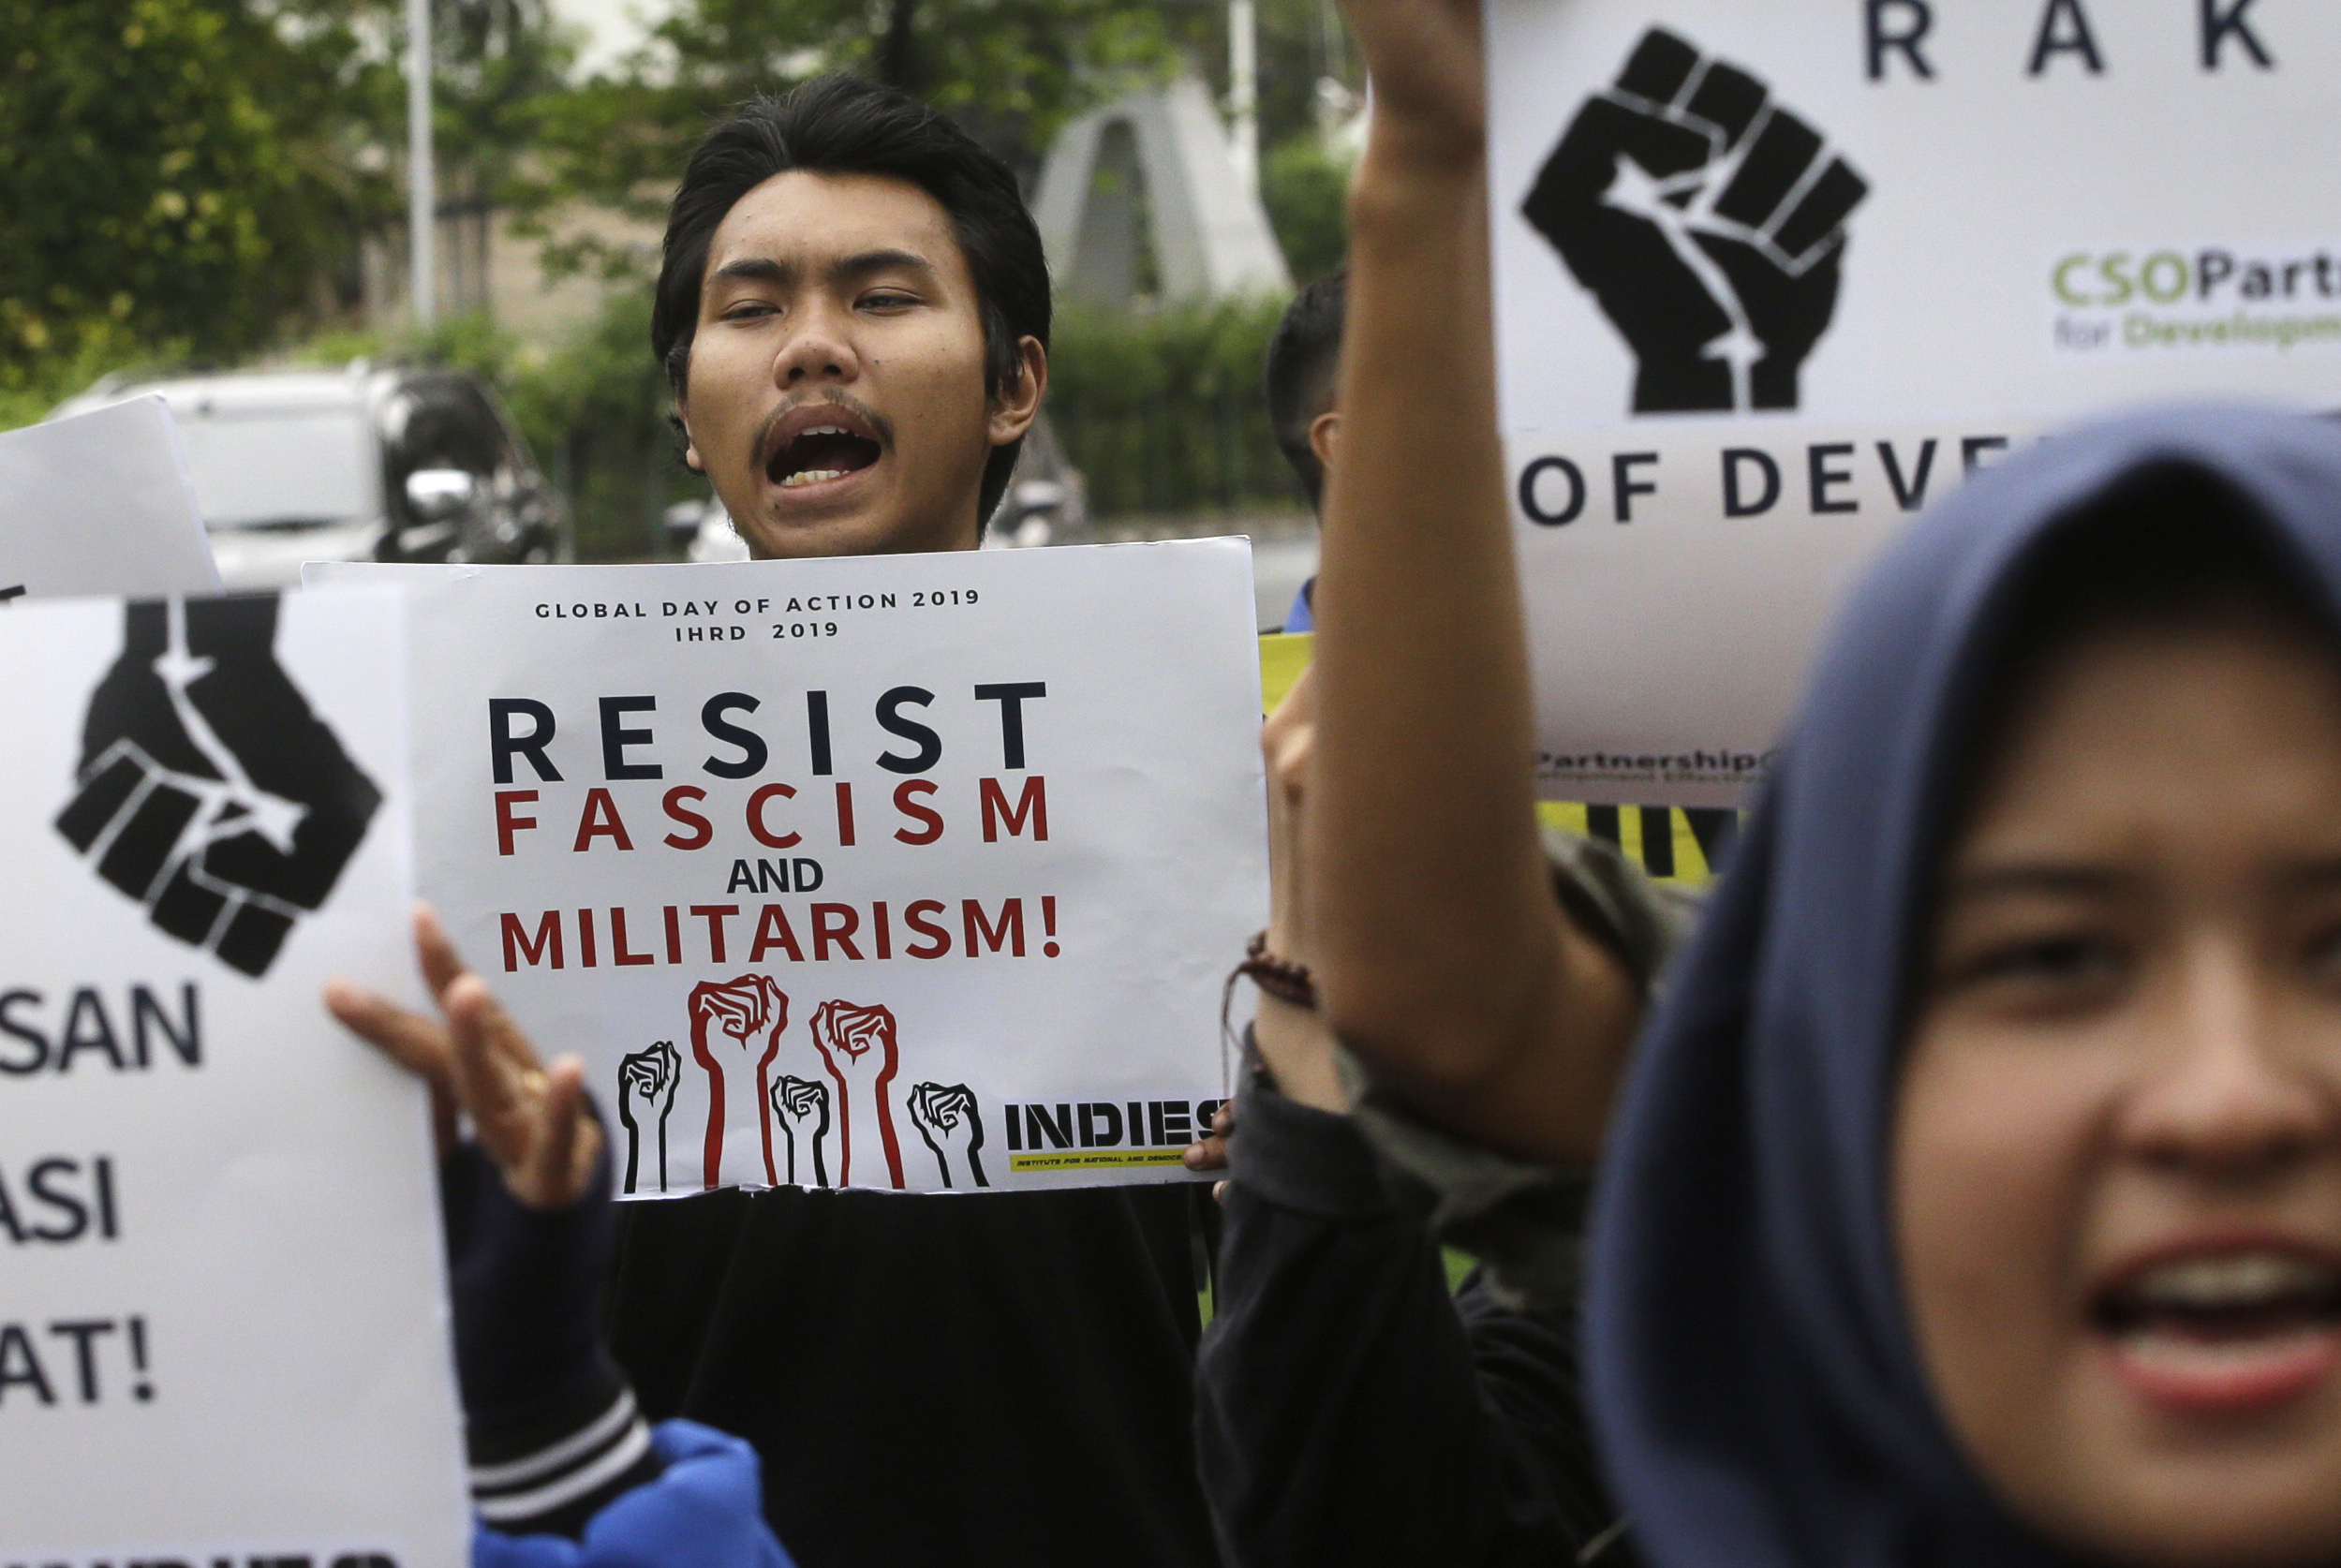 Activists shout slogans during rally to mark the Human Rights Day outside U.S. embassy in Jakarta, Indonesia, Tuesday, Dec. 10, 2019. Rights activists marched in Indonesia's capital Tuesday, calling on the government of the world's most populous Muslim and third largest democracy to protect and respect human rights.(AP Photo/Achmad Ibrahim)